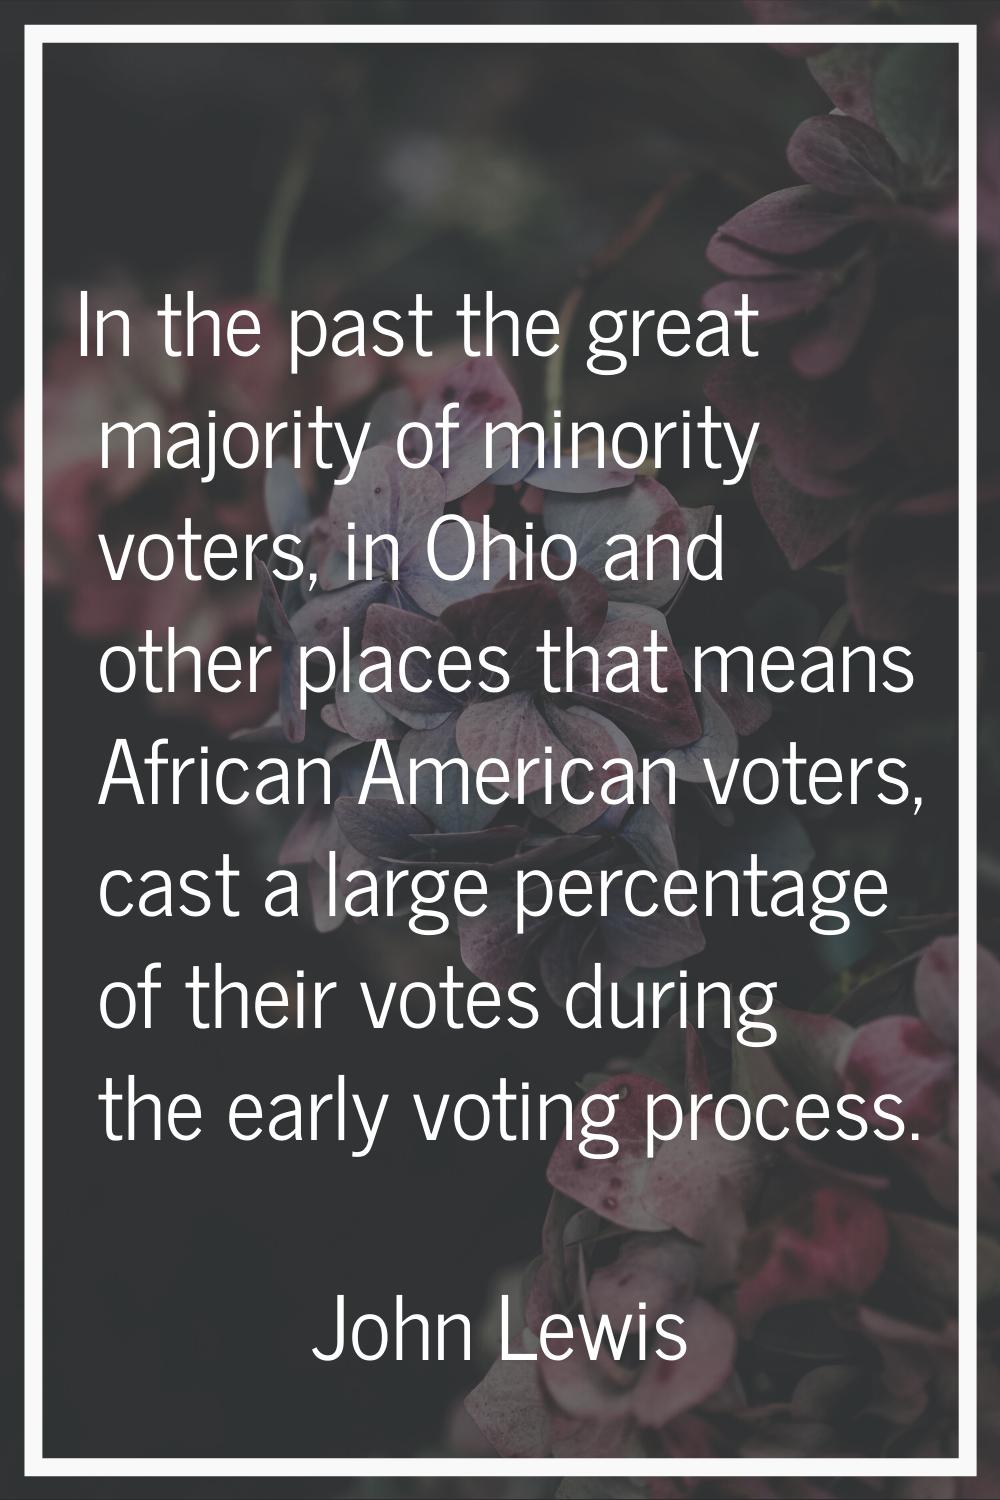 In the past the great majority of minority voters, in Ohio and other places that means African Amer